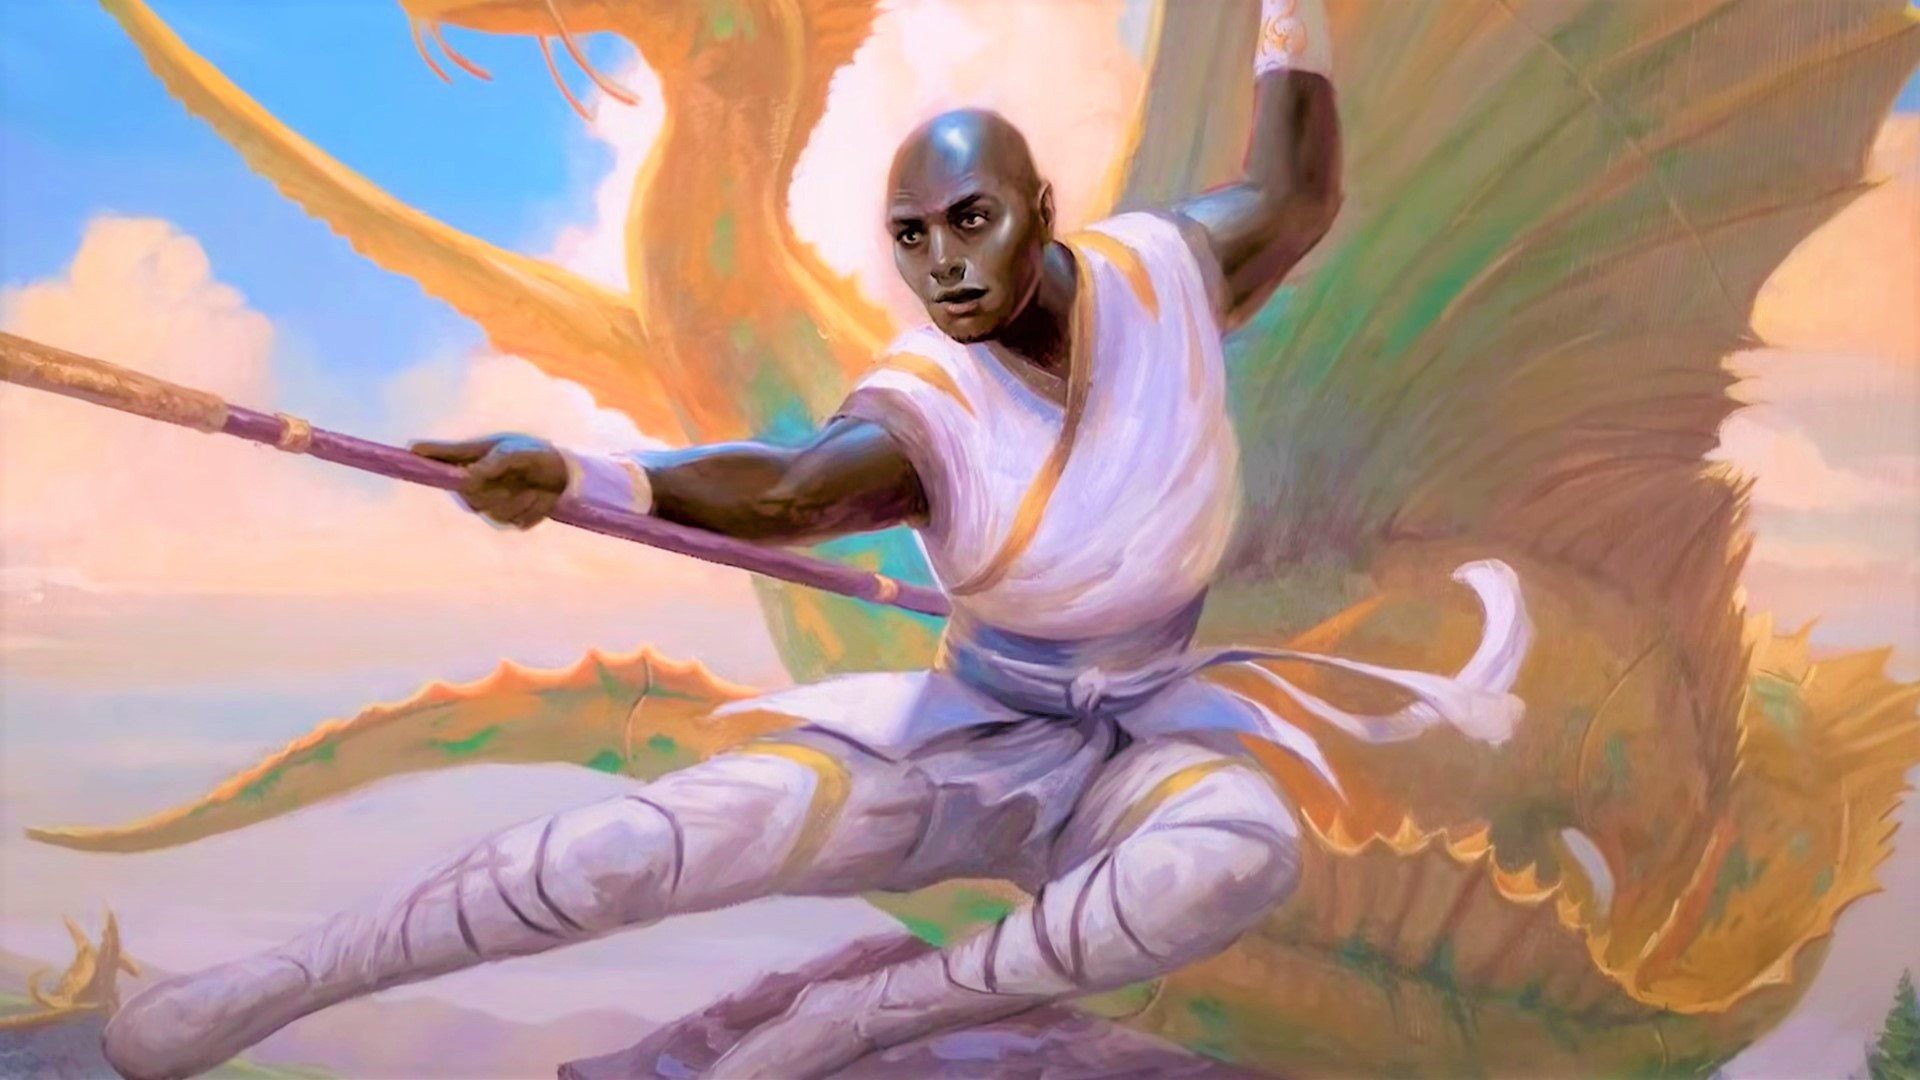 DnD human 5e monk kicking mid-air (art by Wizards of the Coast)